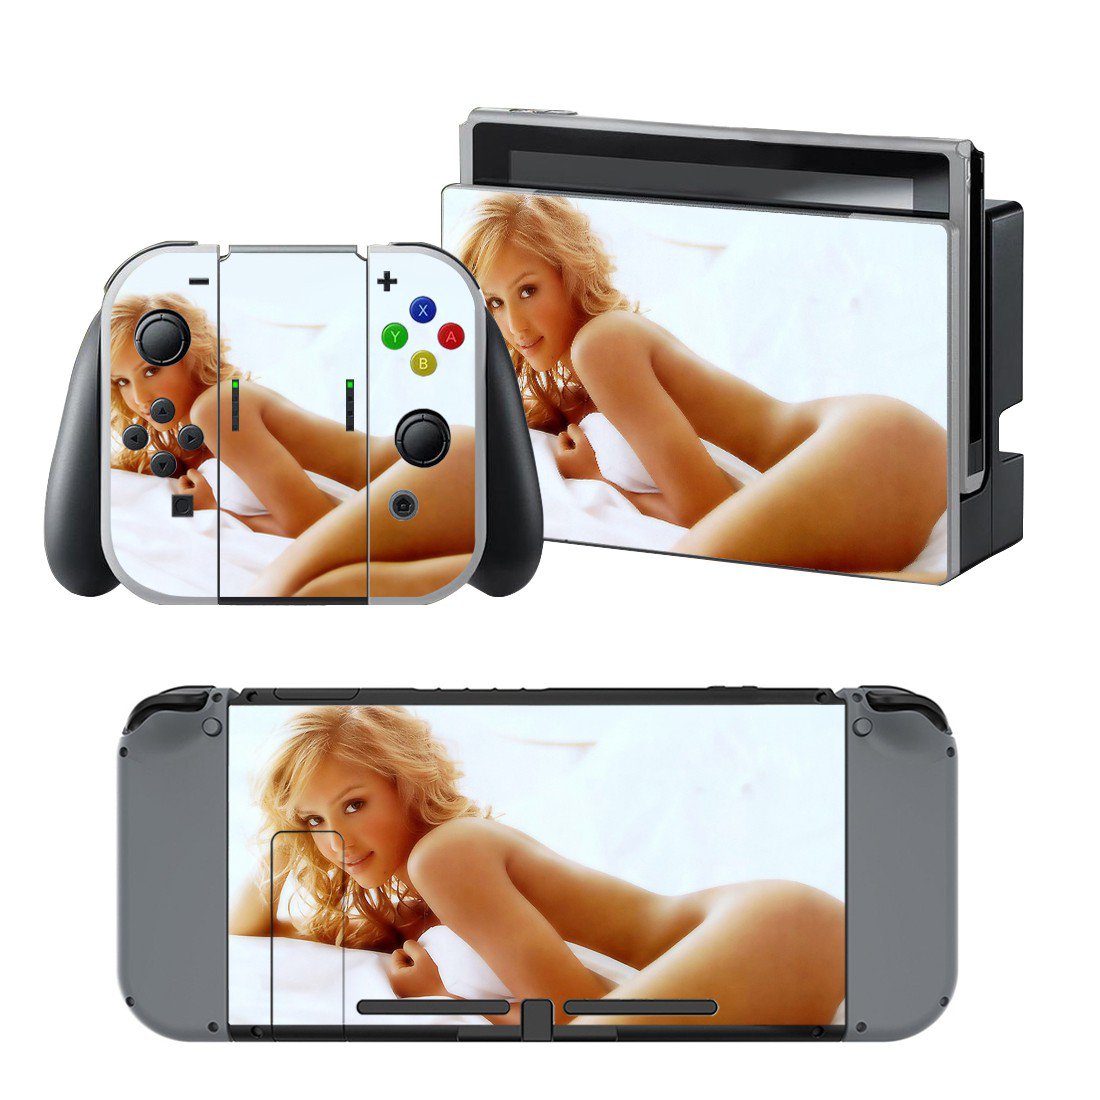 Nude Girl design decal for Nintendo switch console sticker skin. 